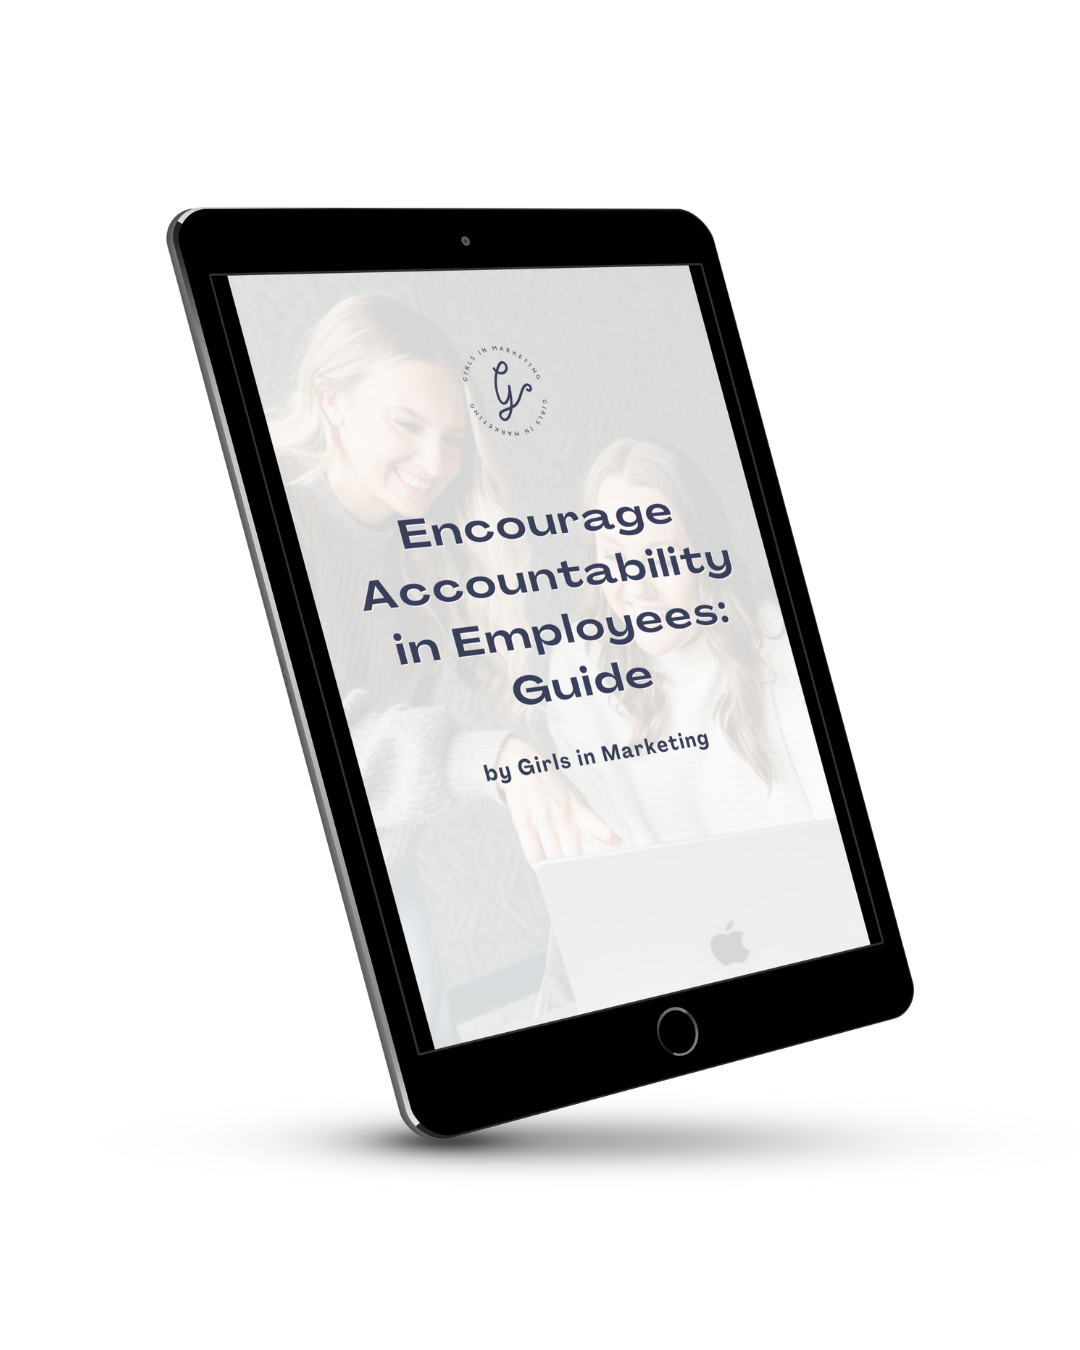 Encourage Accountability in Employees Guide